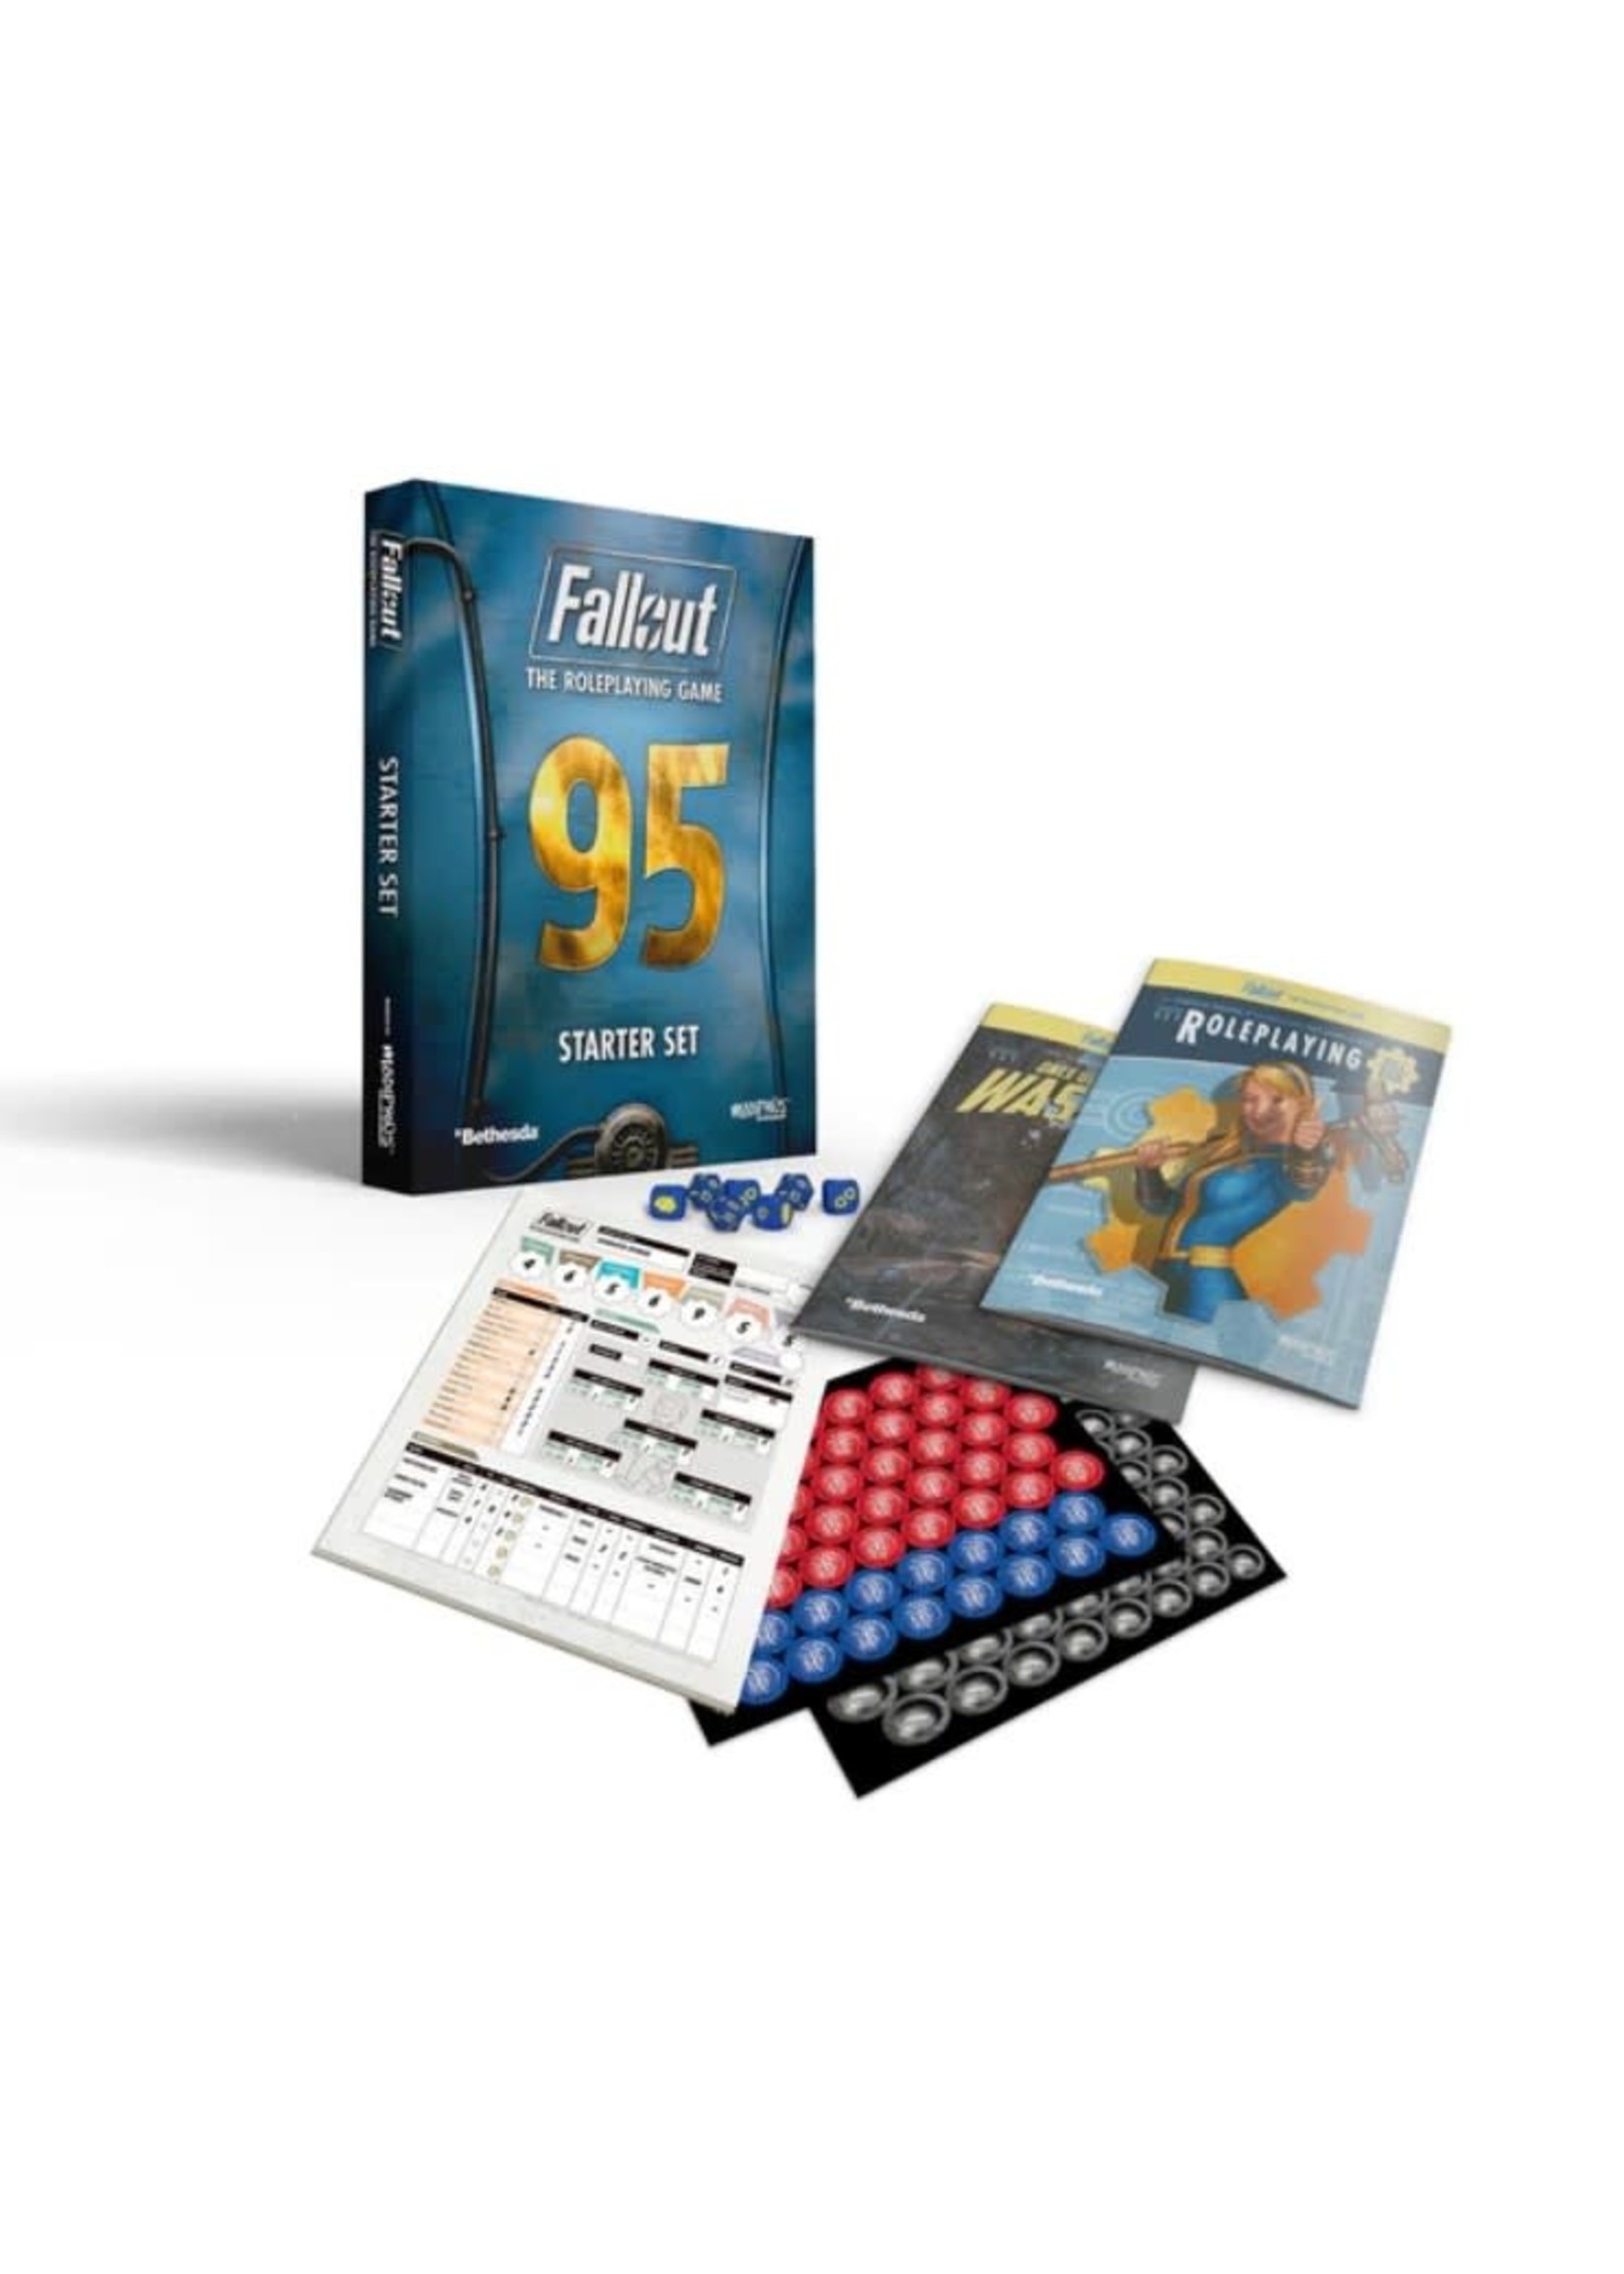 Modiphius Fallout the Roleplaying Game - Starter Set (ENG)